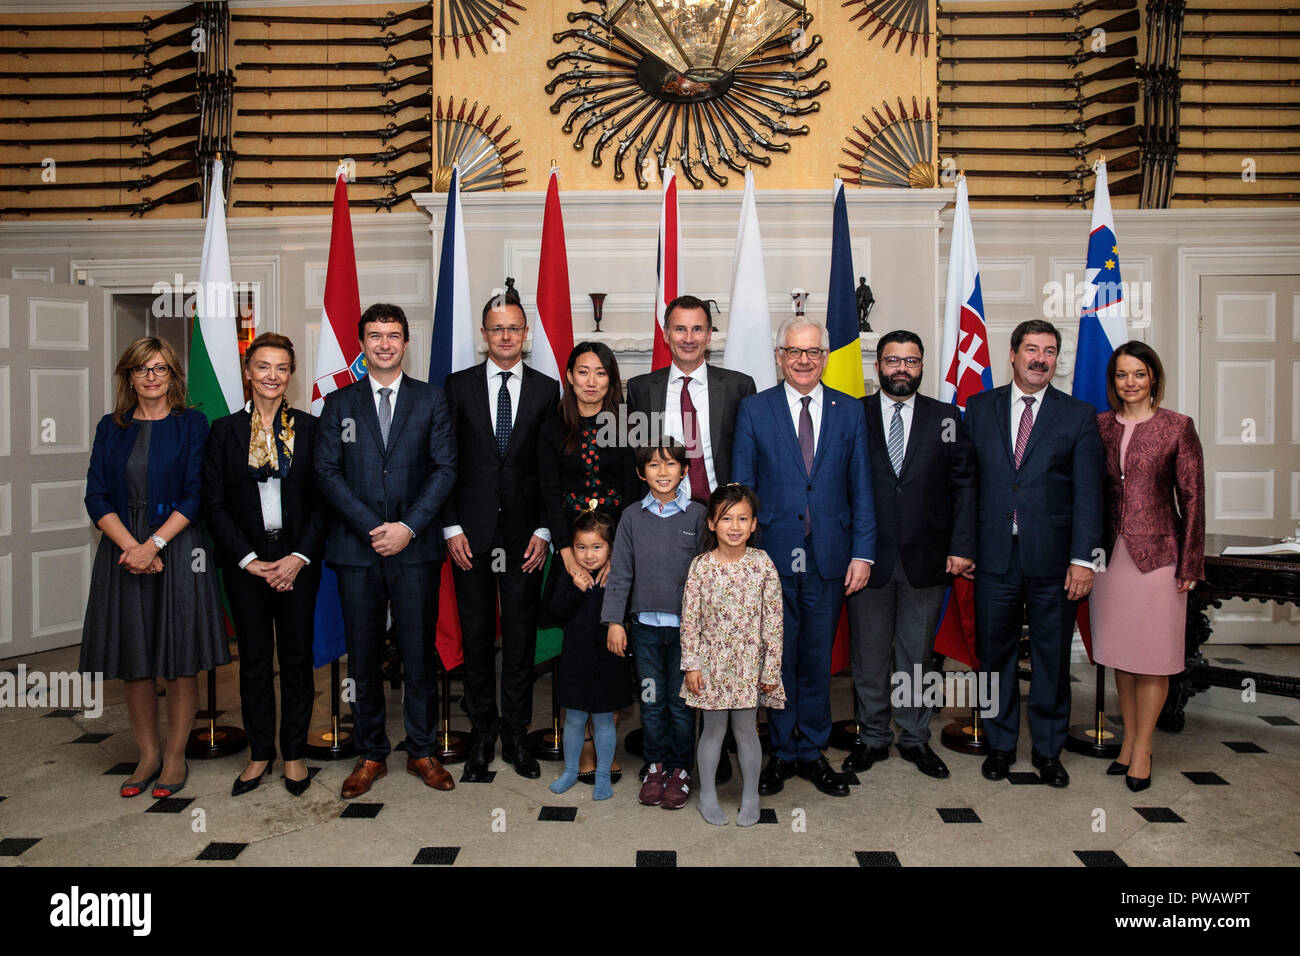 (left to right) Bulgarian Foreign Minister Ekaterina Zaharieva, Croatian Deputy Prime Minister and Foreign Minister Marija Pejcinovic Buric, Czech Republic Deputy Foreign Minister Lukas Kaucky, Hungarian Foreign Minister Peter Szijjarto, Lucia Hunt, her husband British Foreign Secretary Jeremy Hunt and their children Ellie, aged 4, Jack, aged 8 and Anna, aged 6, Polish Foreign Minister Jacek Czaputowicz, Romanian State Secretary Danut Neculaescu, Slovakian Europe Minister Frantisek Ruzicka and Slovenian State Secretary Simona Leskovar pose for a photograph at Chevening House at Chevening House Stock Photo